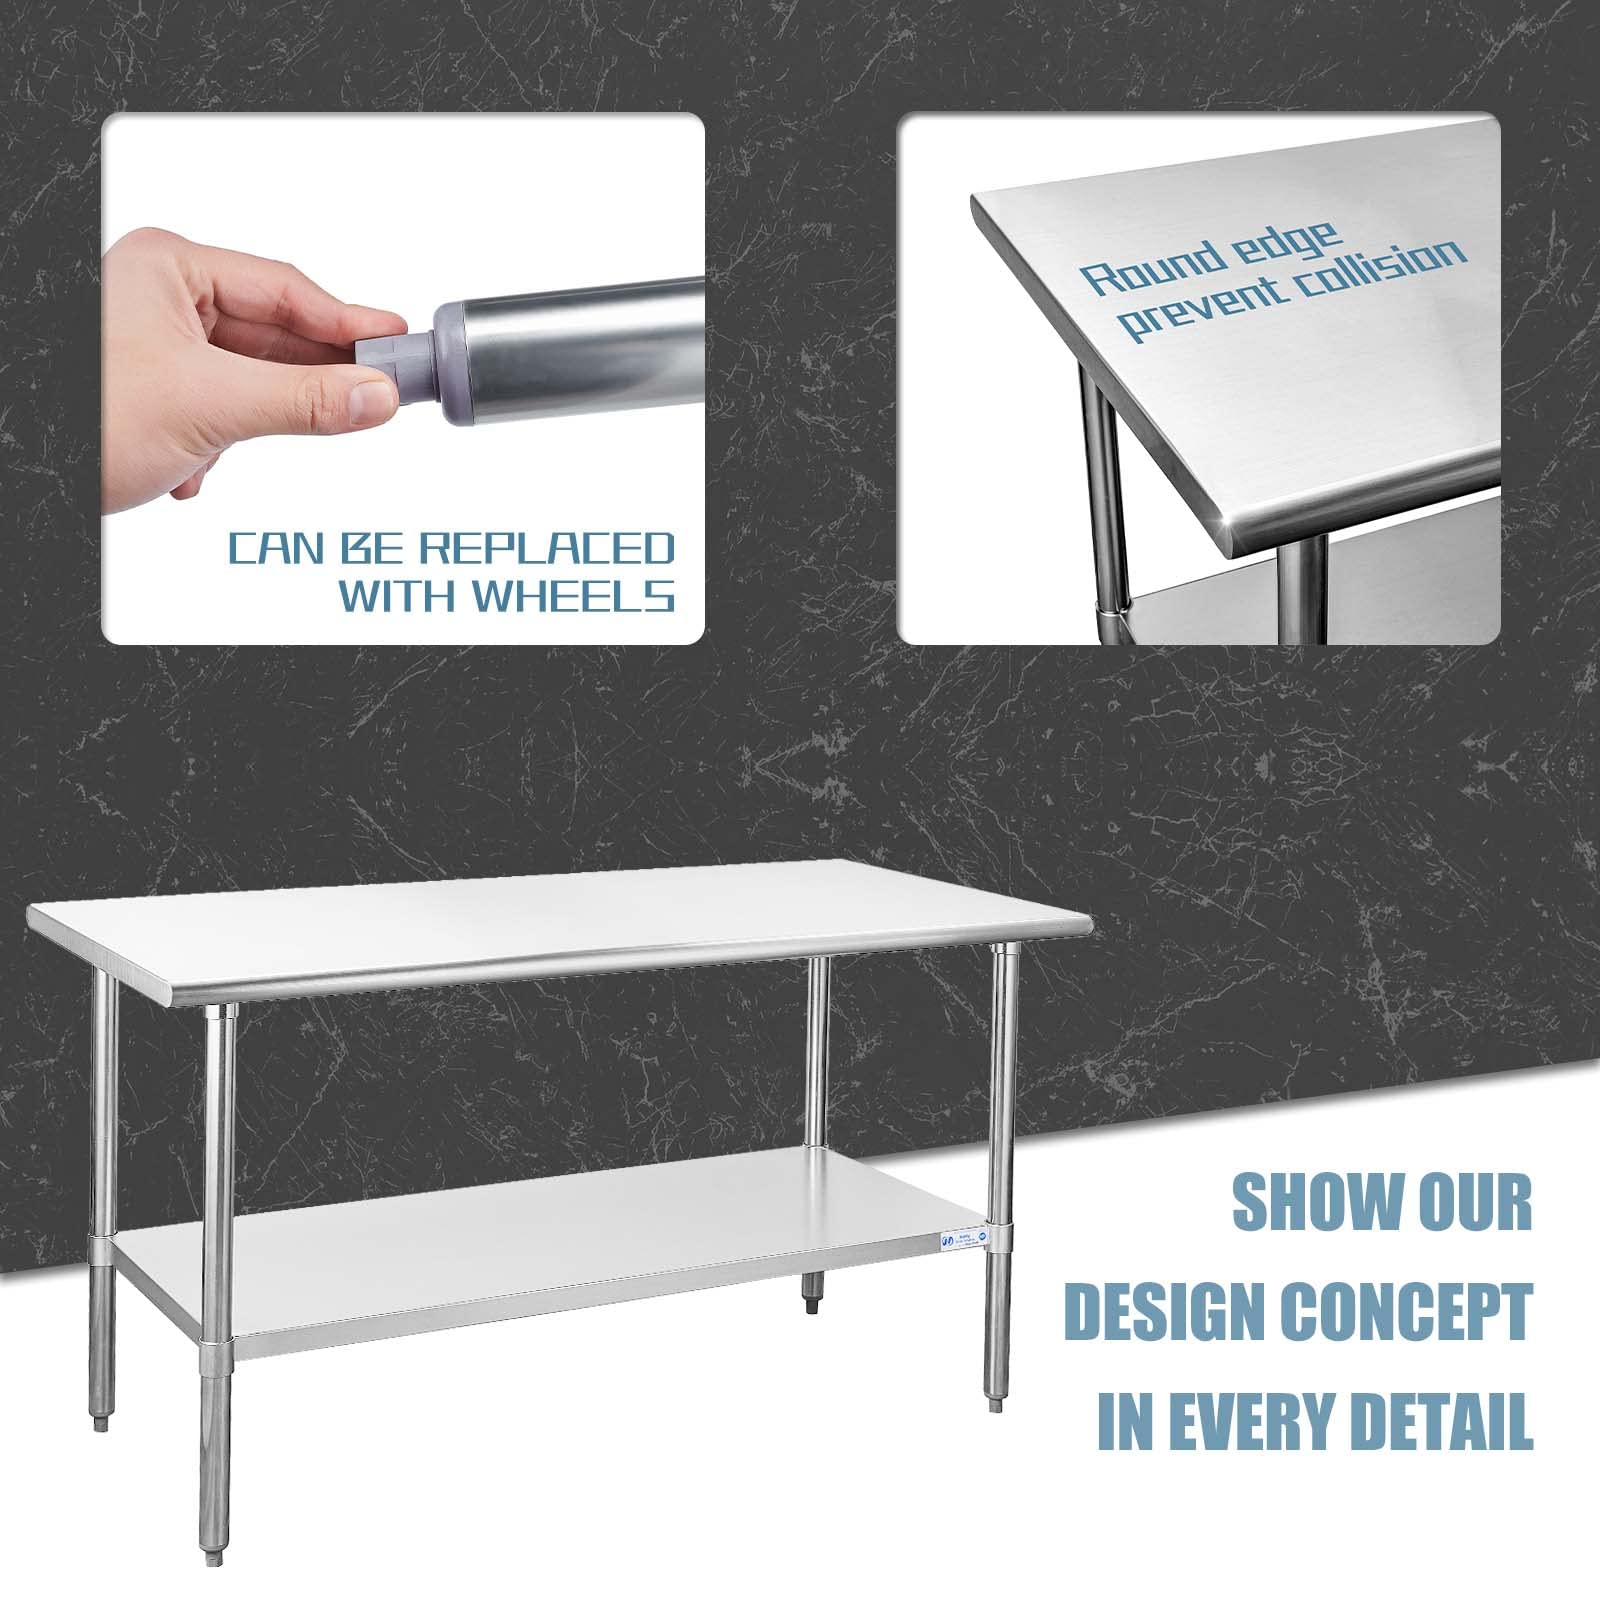 Hally Stainless Steel Table for Prep & Work 24 x 60 Inches, NSF Commercial Heavy Duty Table with Undershelf and Galvanized Legs for Restaurant, Home and Hotel